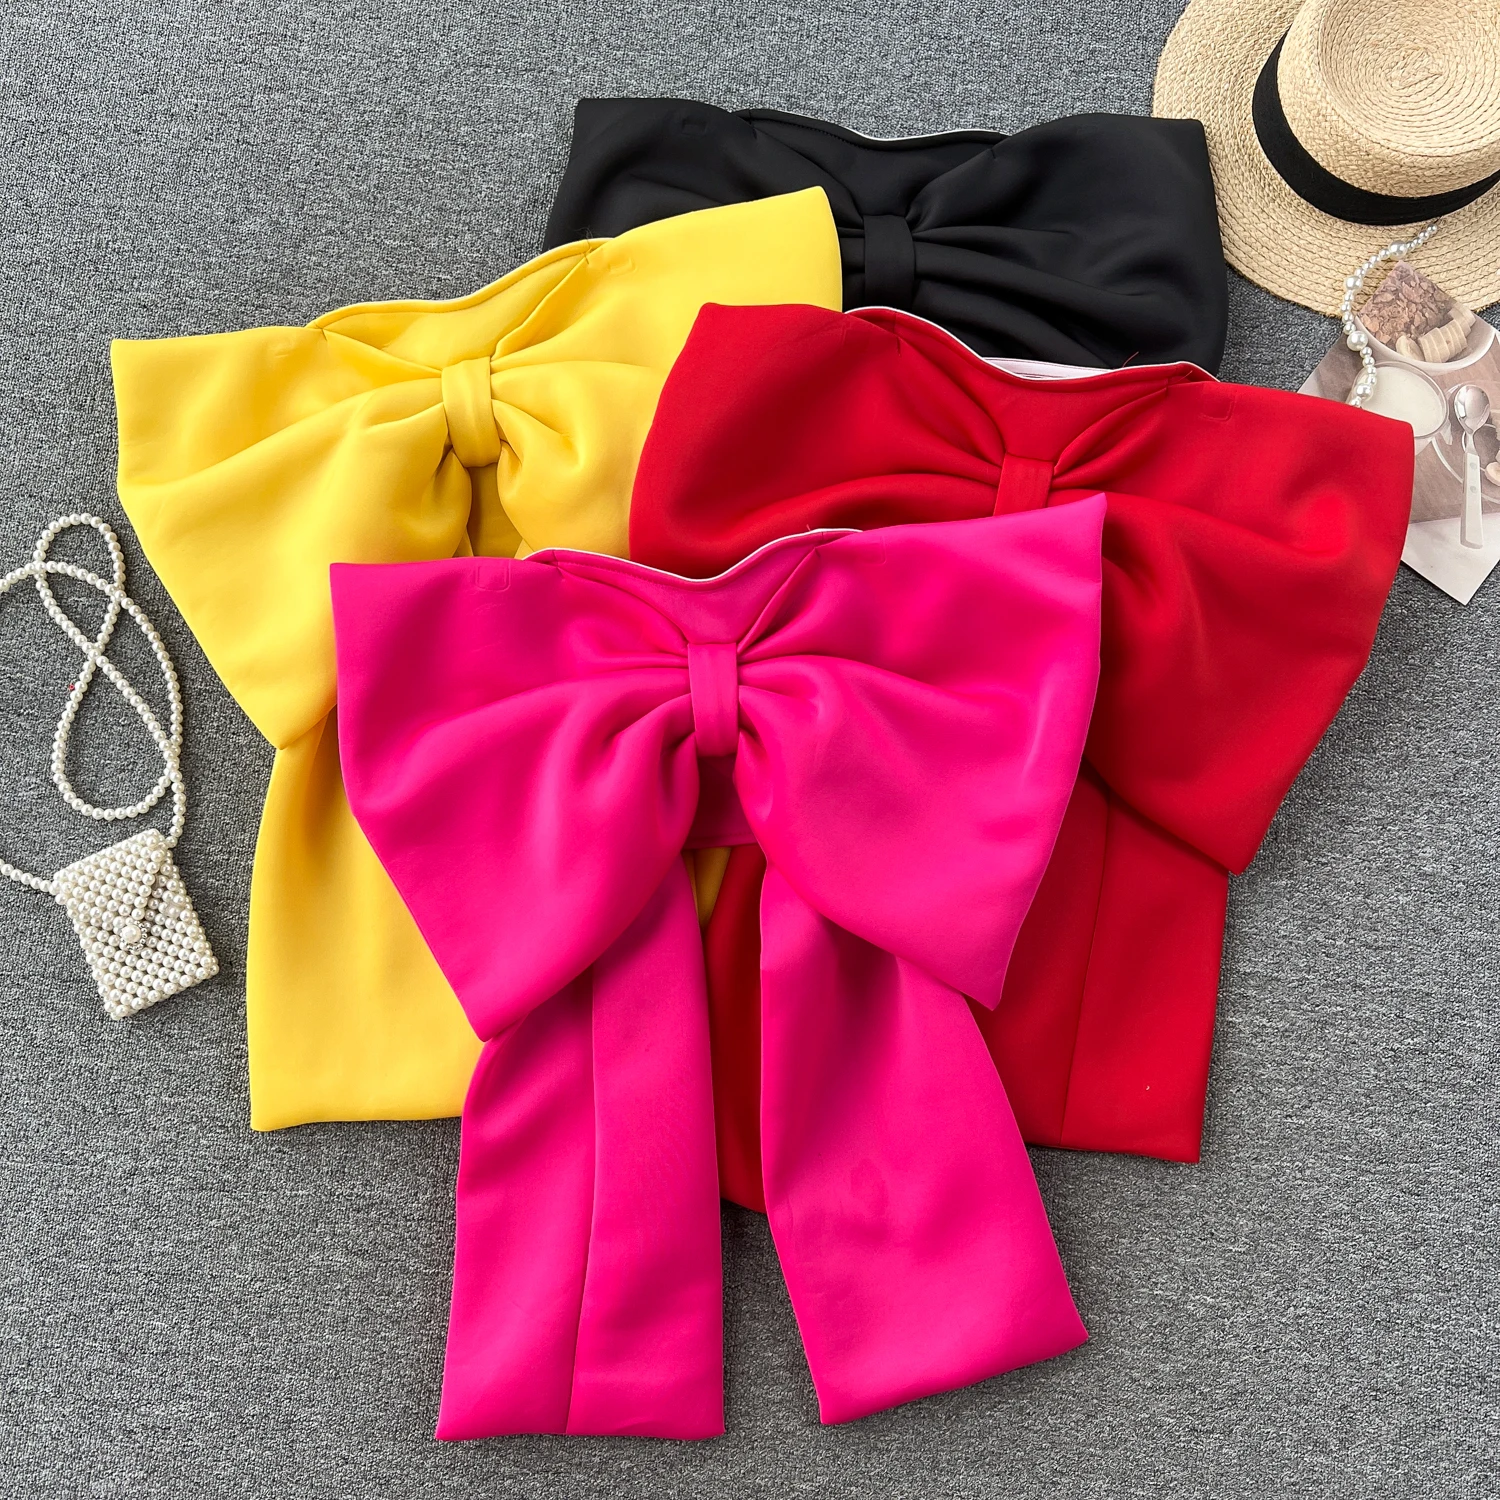 

Clothland Women Sexy Bow Tie Crop Top Strapless Sleeveless Zipper Candy Color Short Style Blouse Shirt Chic Tops Blusa WA195